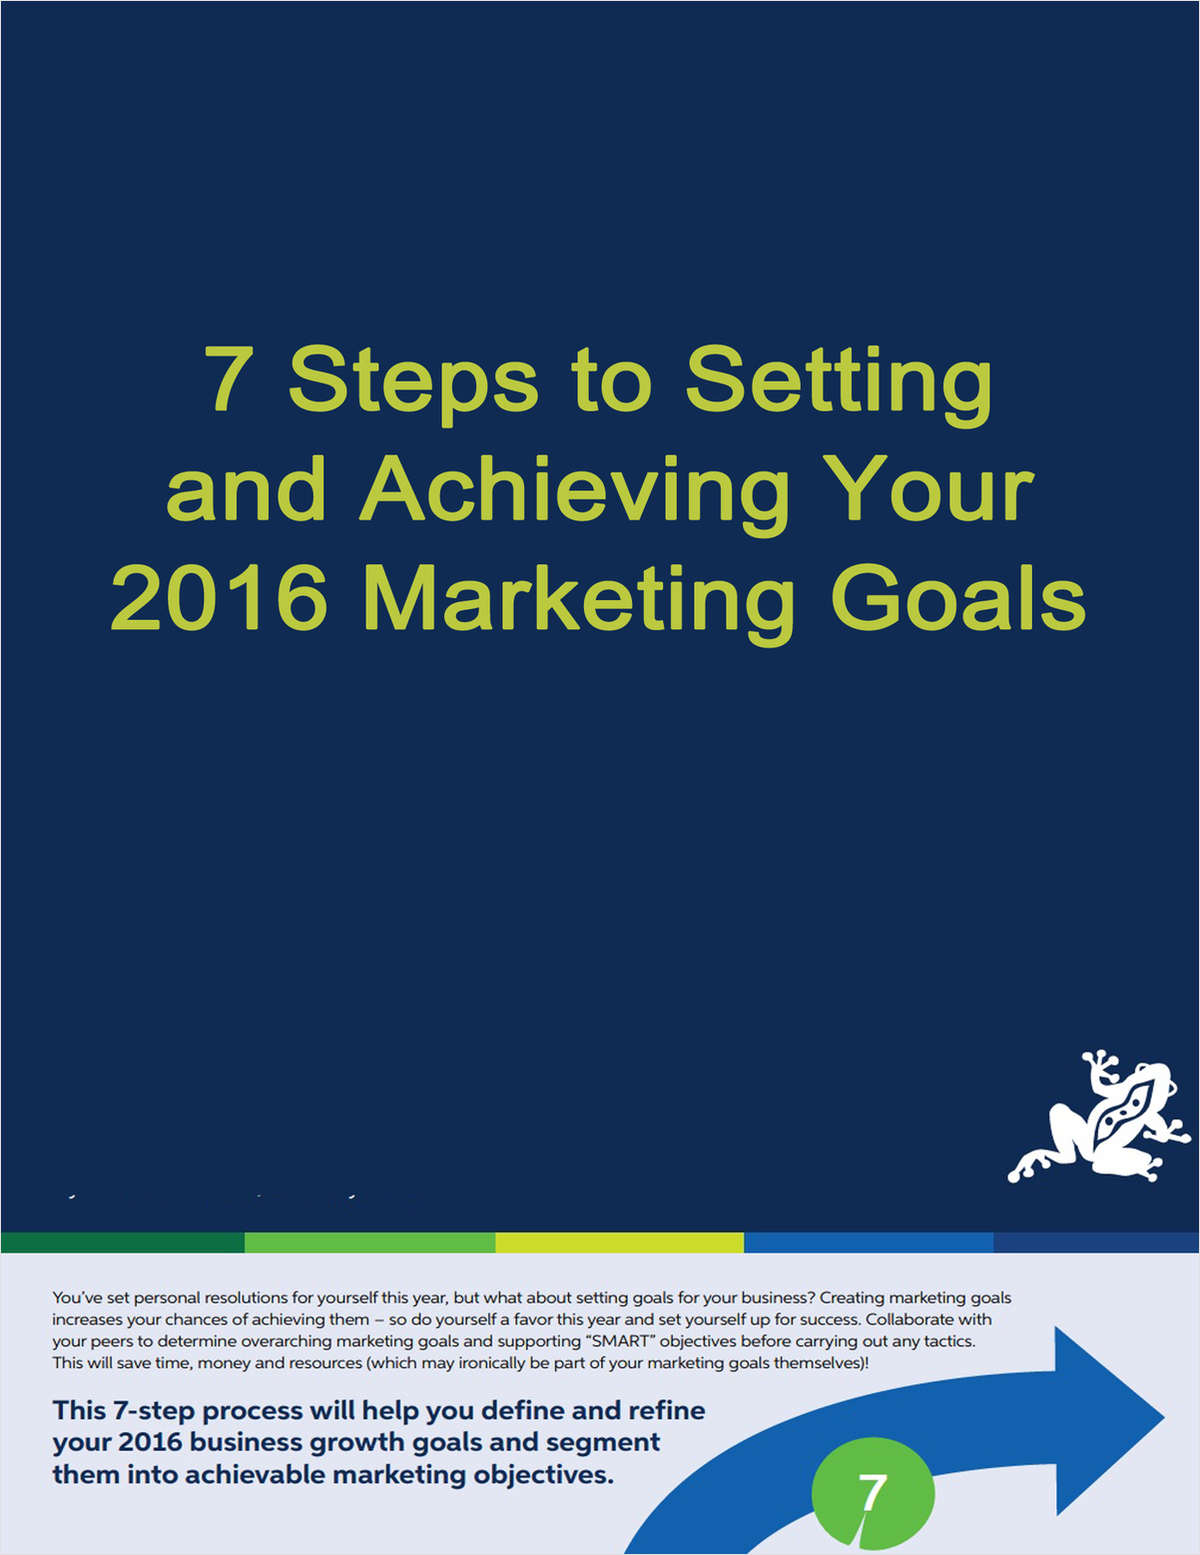 7 Steps to Setting and Achieving Your Marketing Goals